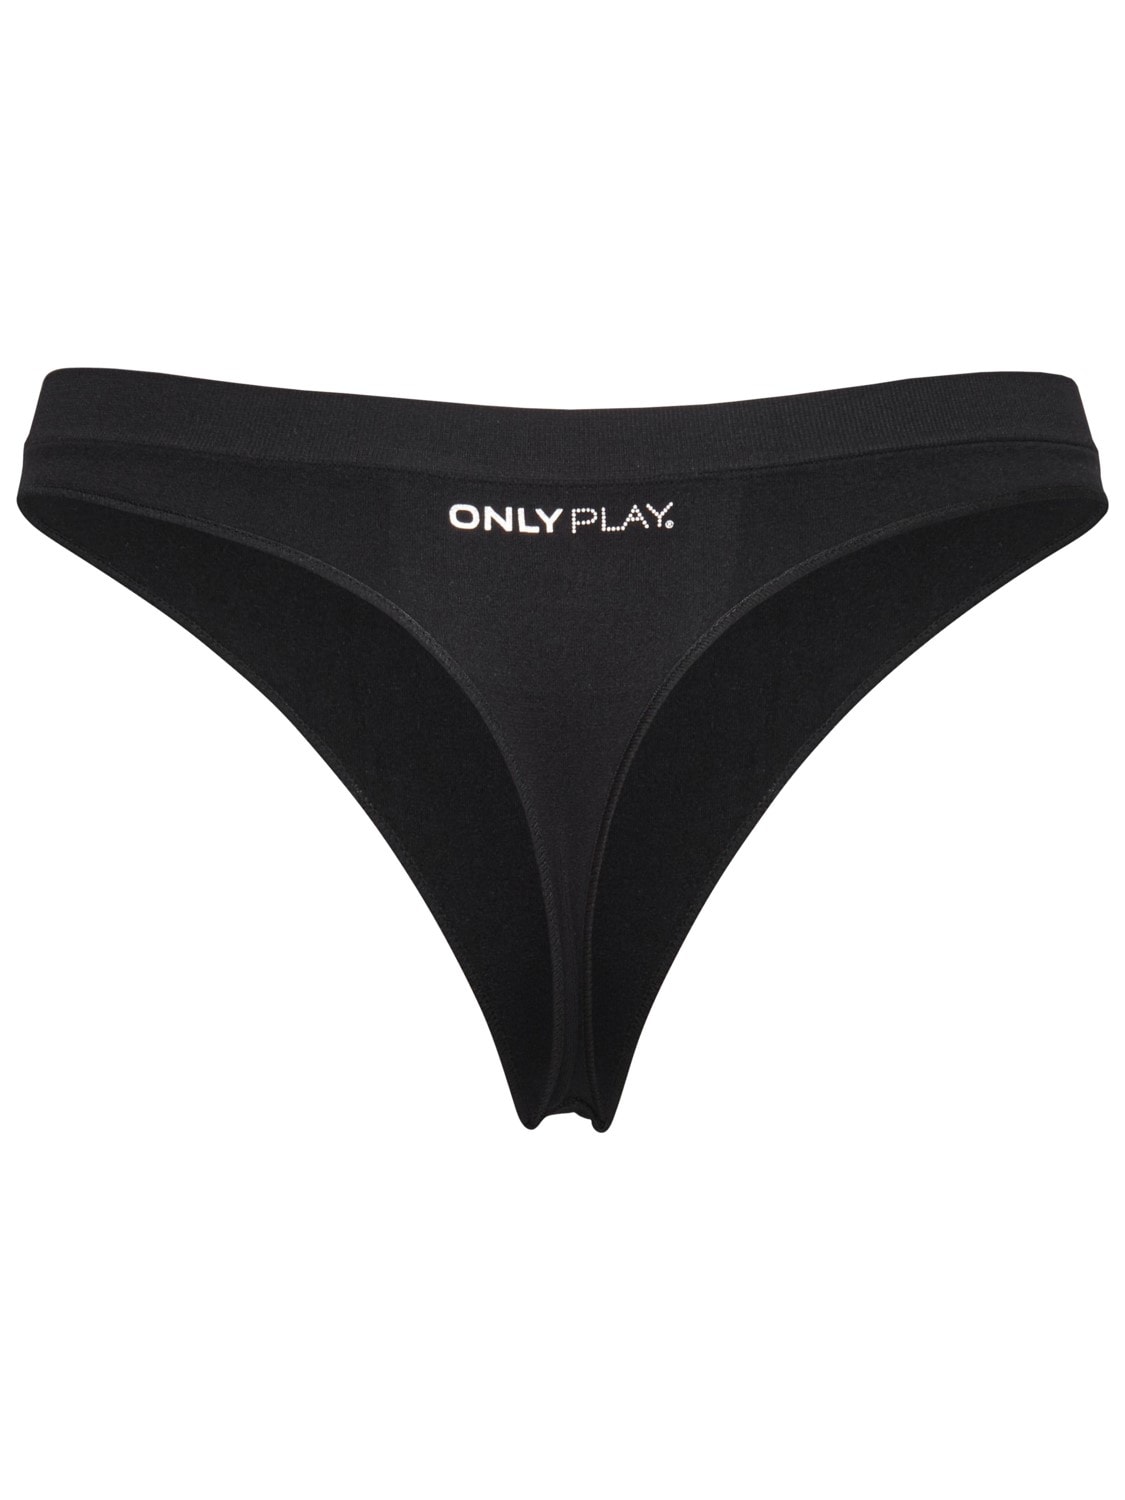 Only Play Power SEamless 2-Pack G-String Black 15143995 c